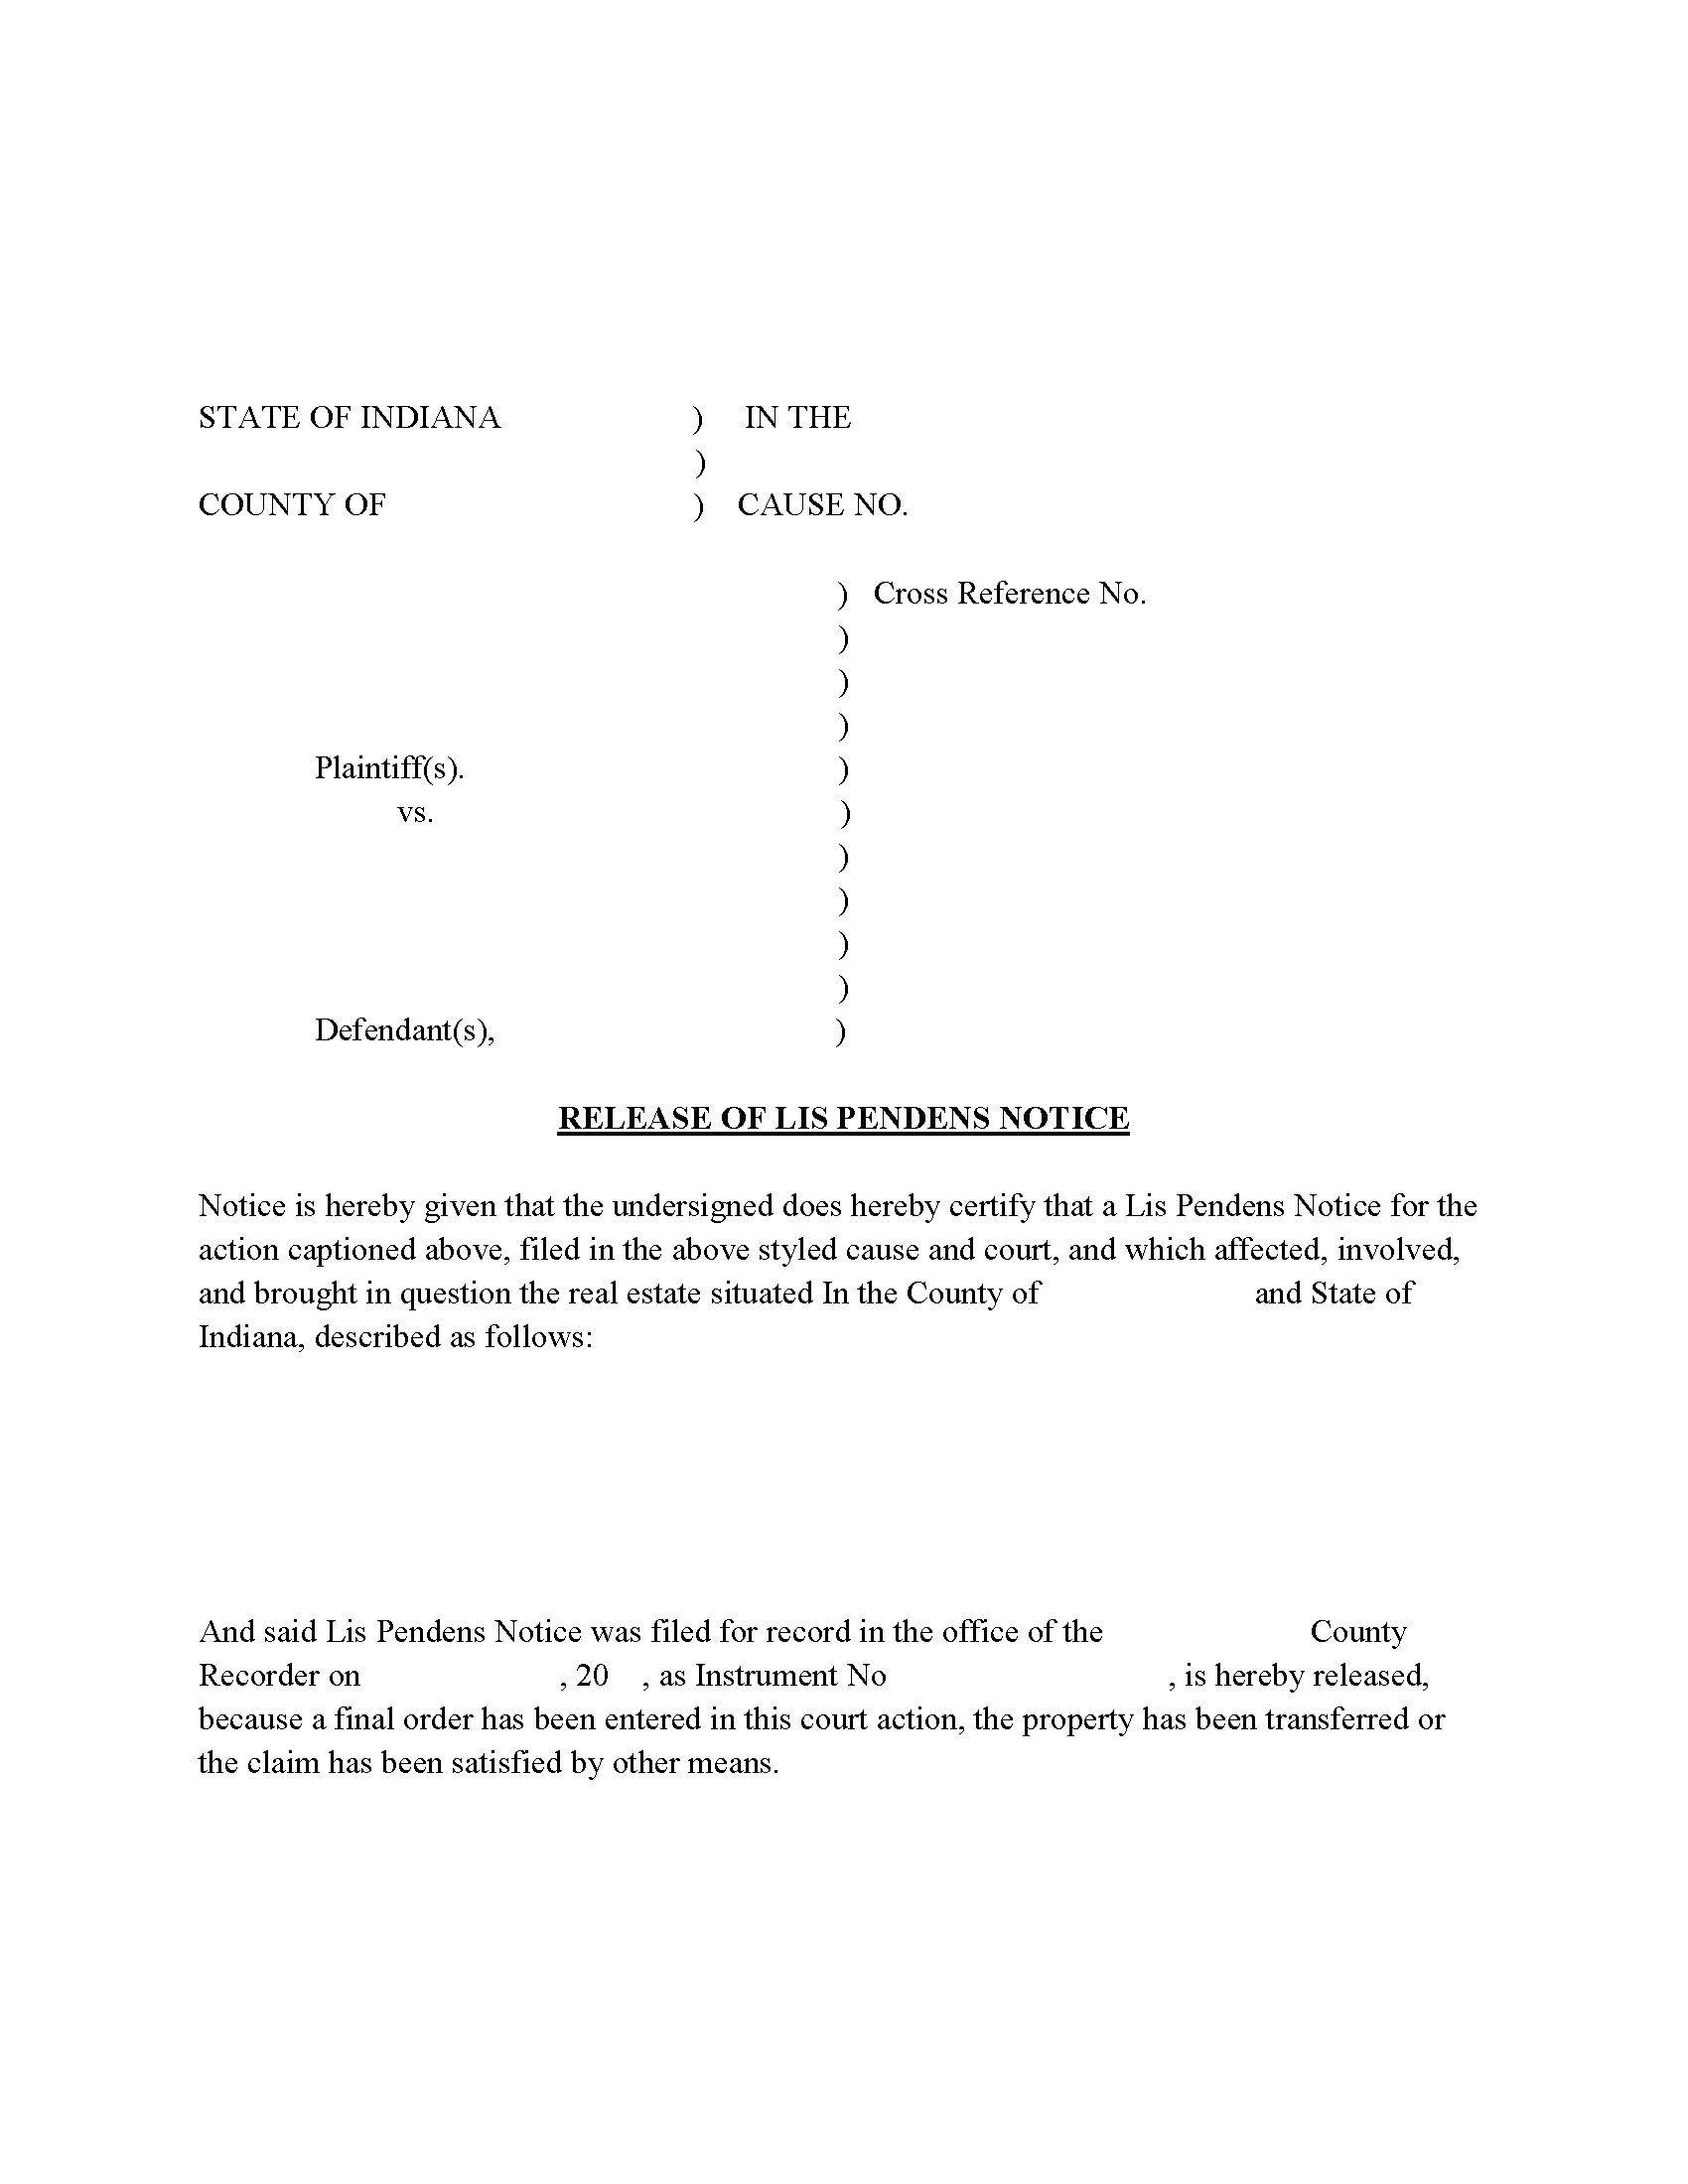 Indiana Release of Lis Pendens Notice Image